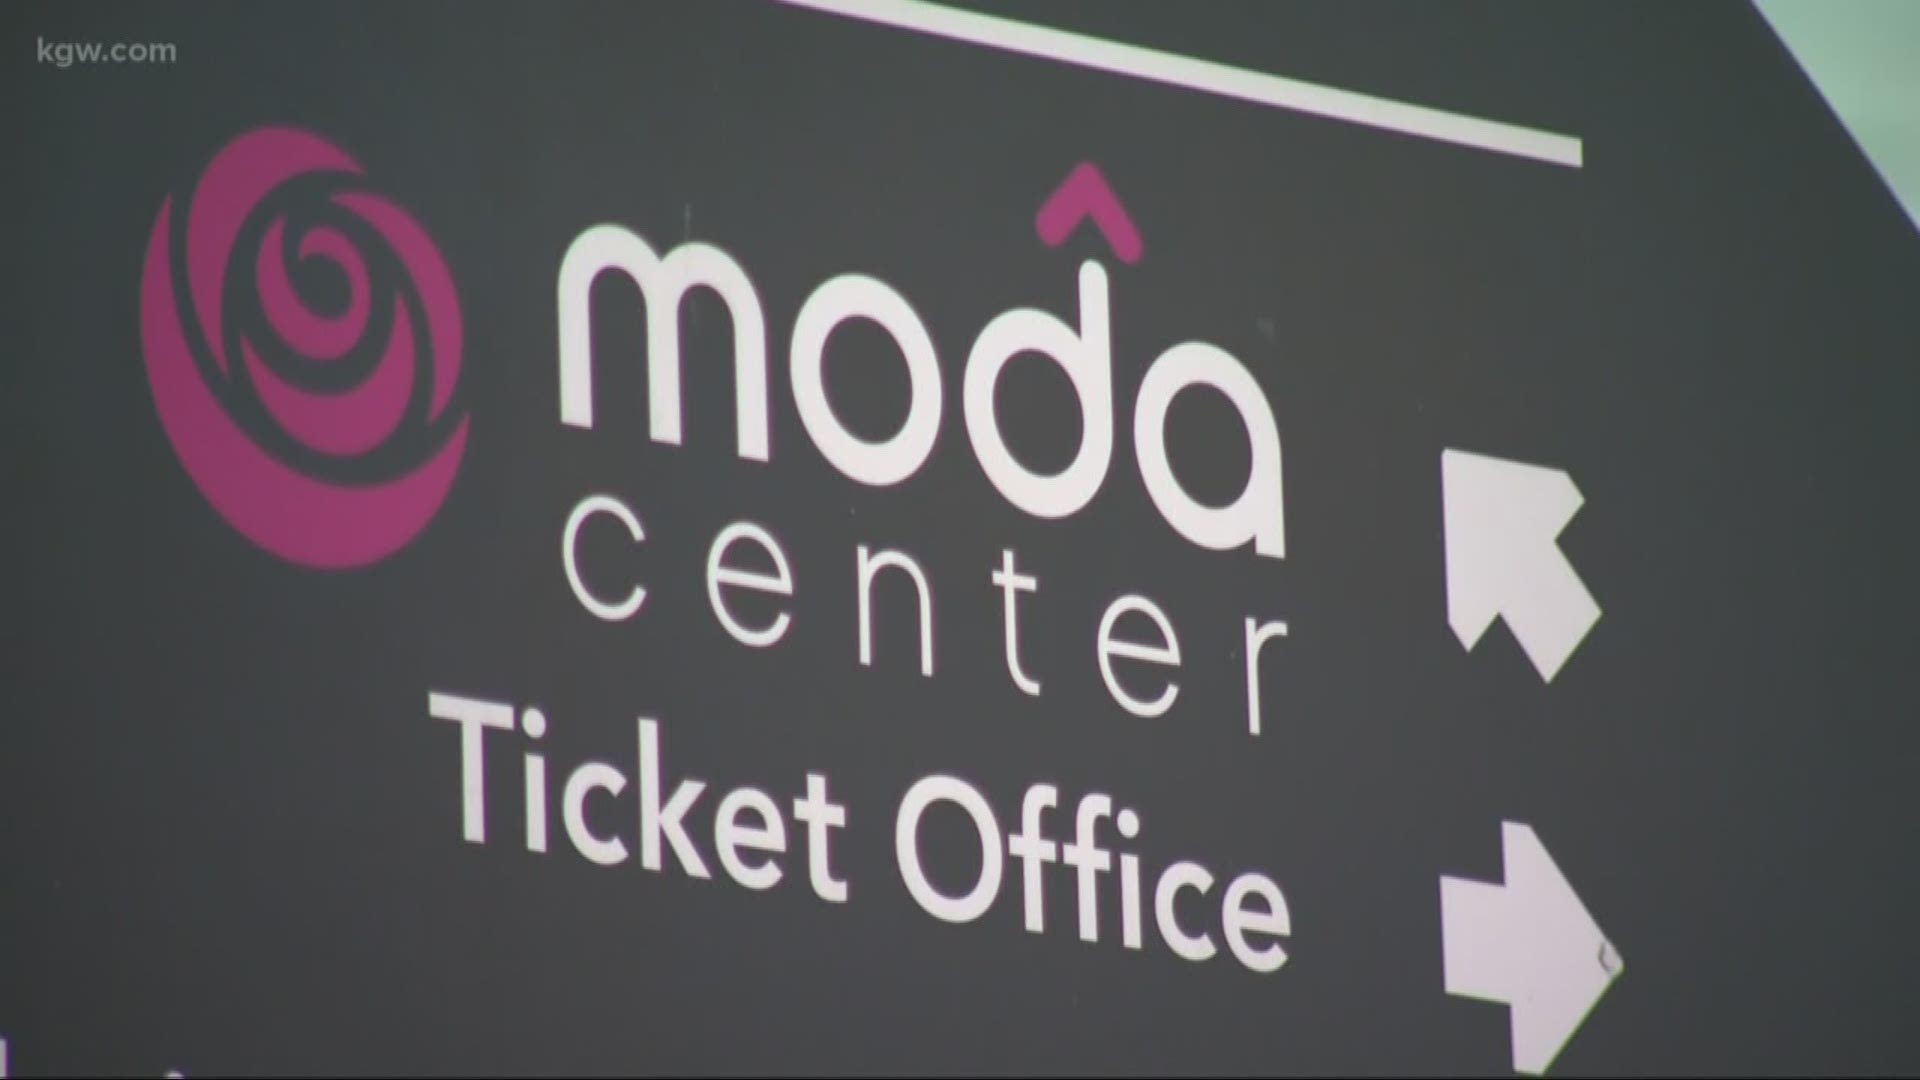 Tickets are at a premium for the NBA Western Conference finals in Rip City.  Tickets to watch the Trail Blazers host the Golden State Warriors Saturday night at the Moda Center are upwards of $200 dollars for back rows and standing room only, and you’ll likely spend thousands to be down near the court.